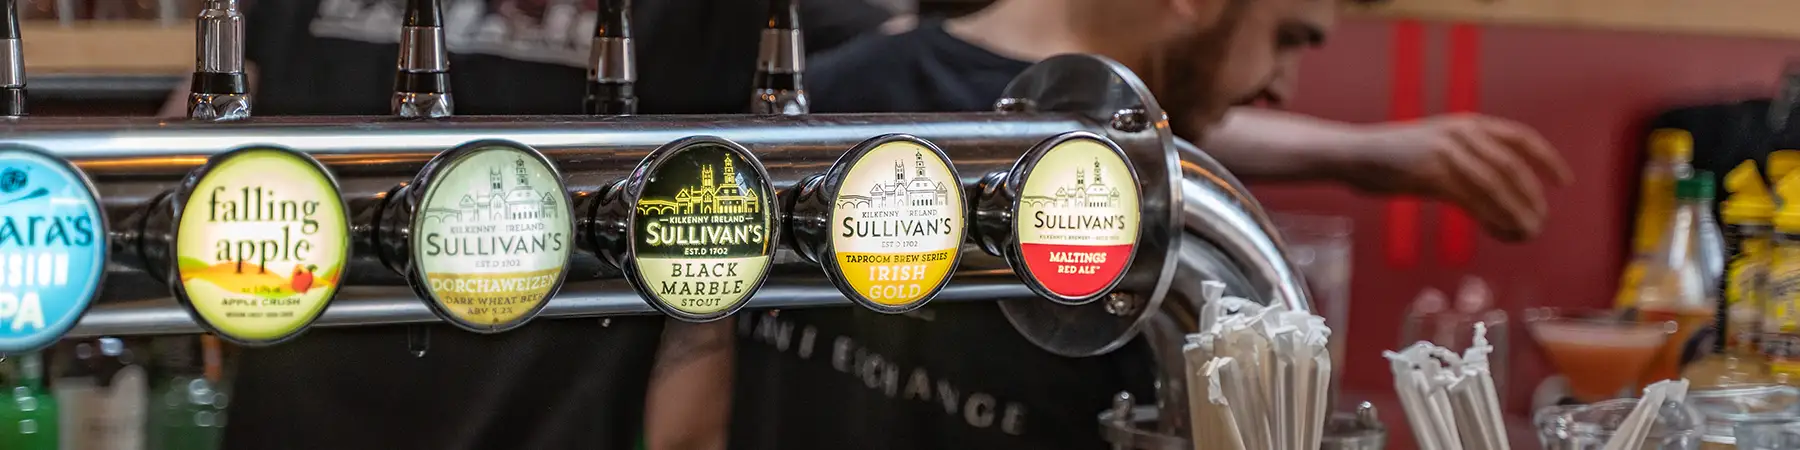 pumps with Sullivans brewery logos on